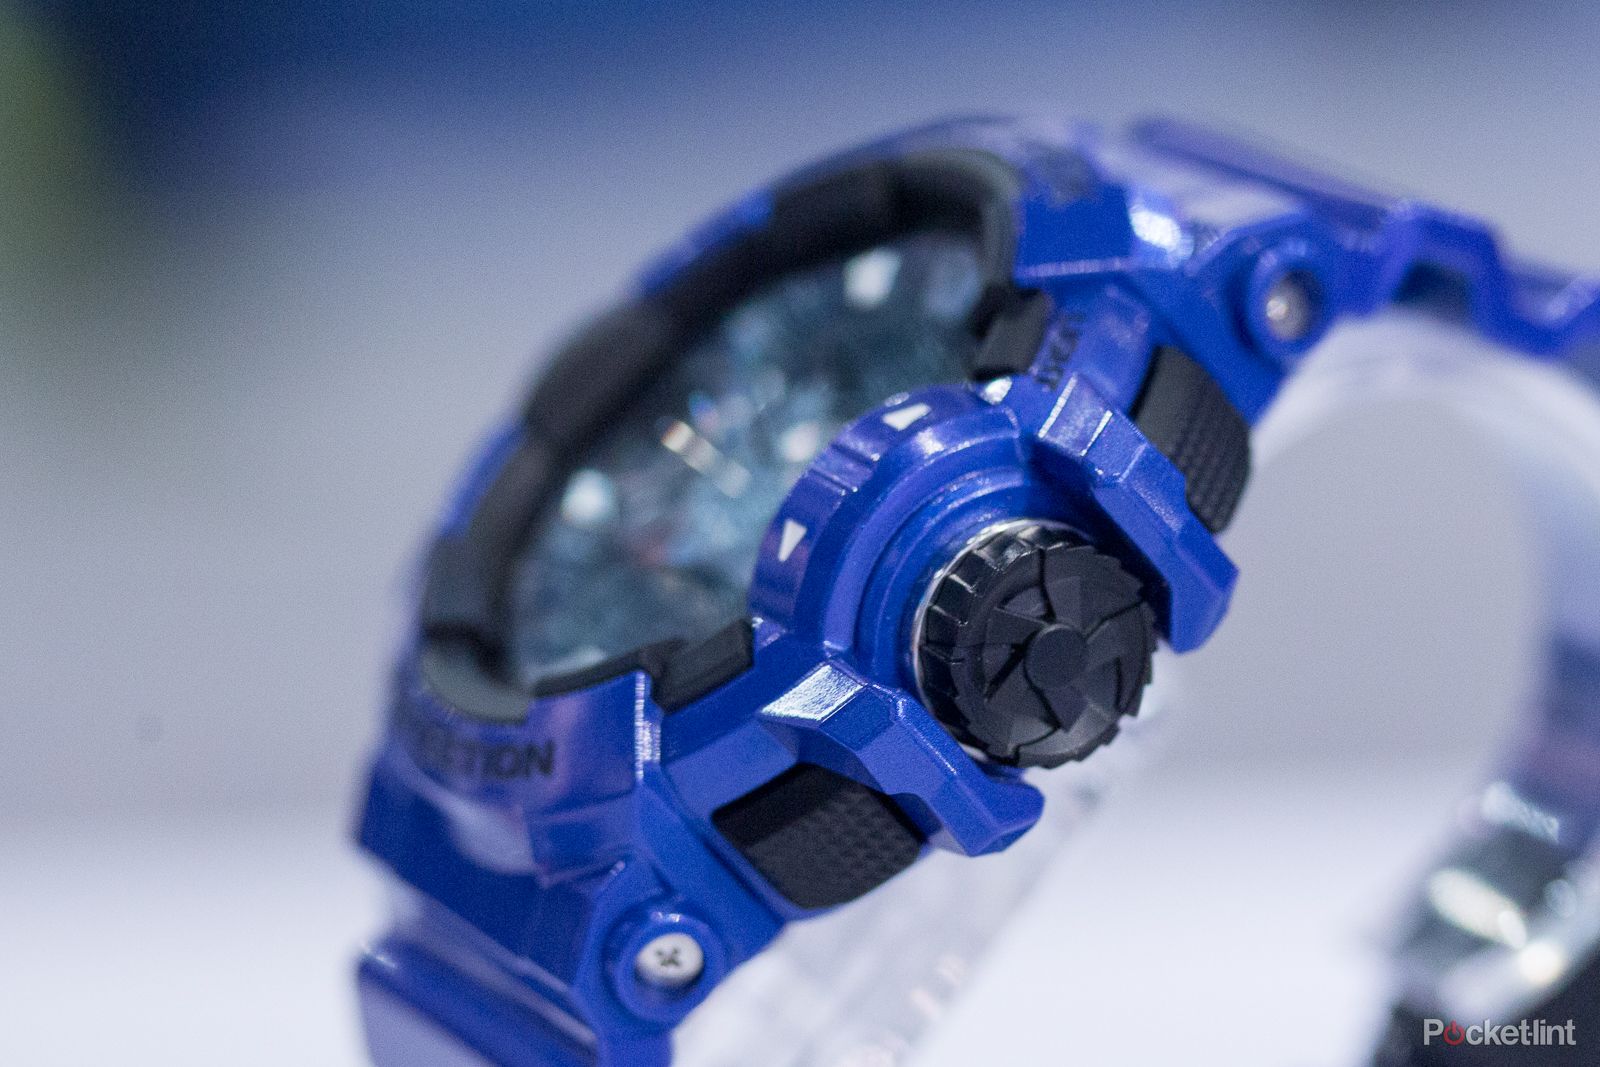 casio is making a smartwatch set to release in 2016 image 1